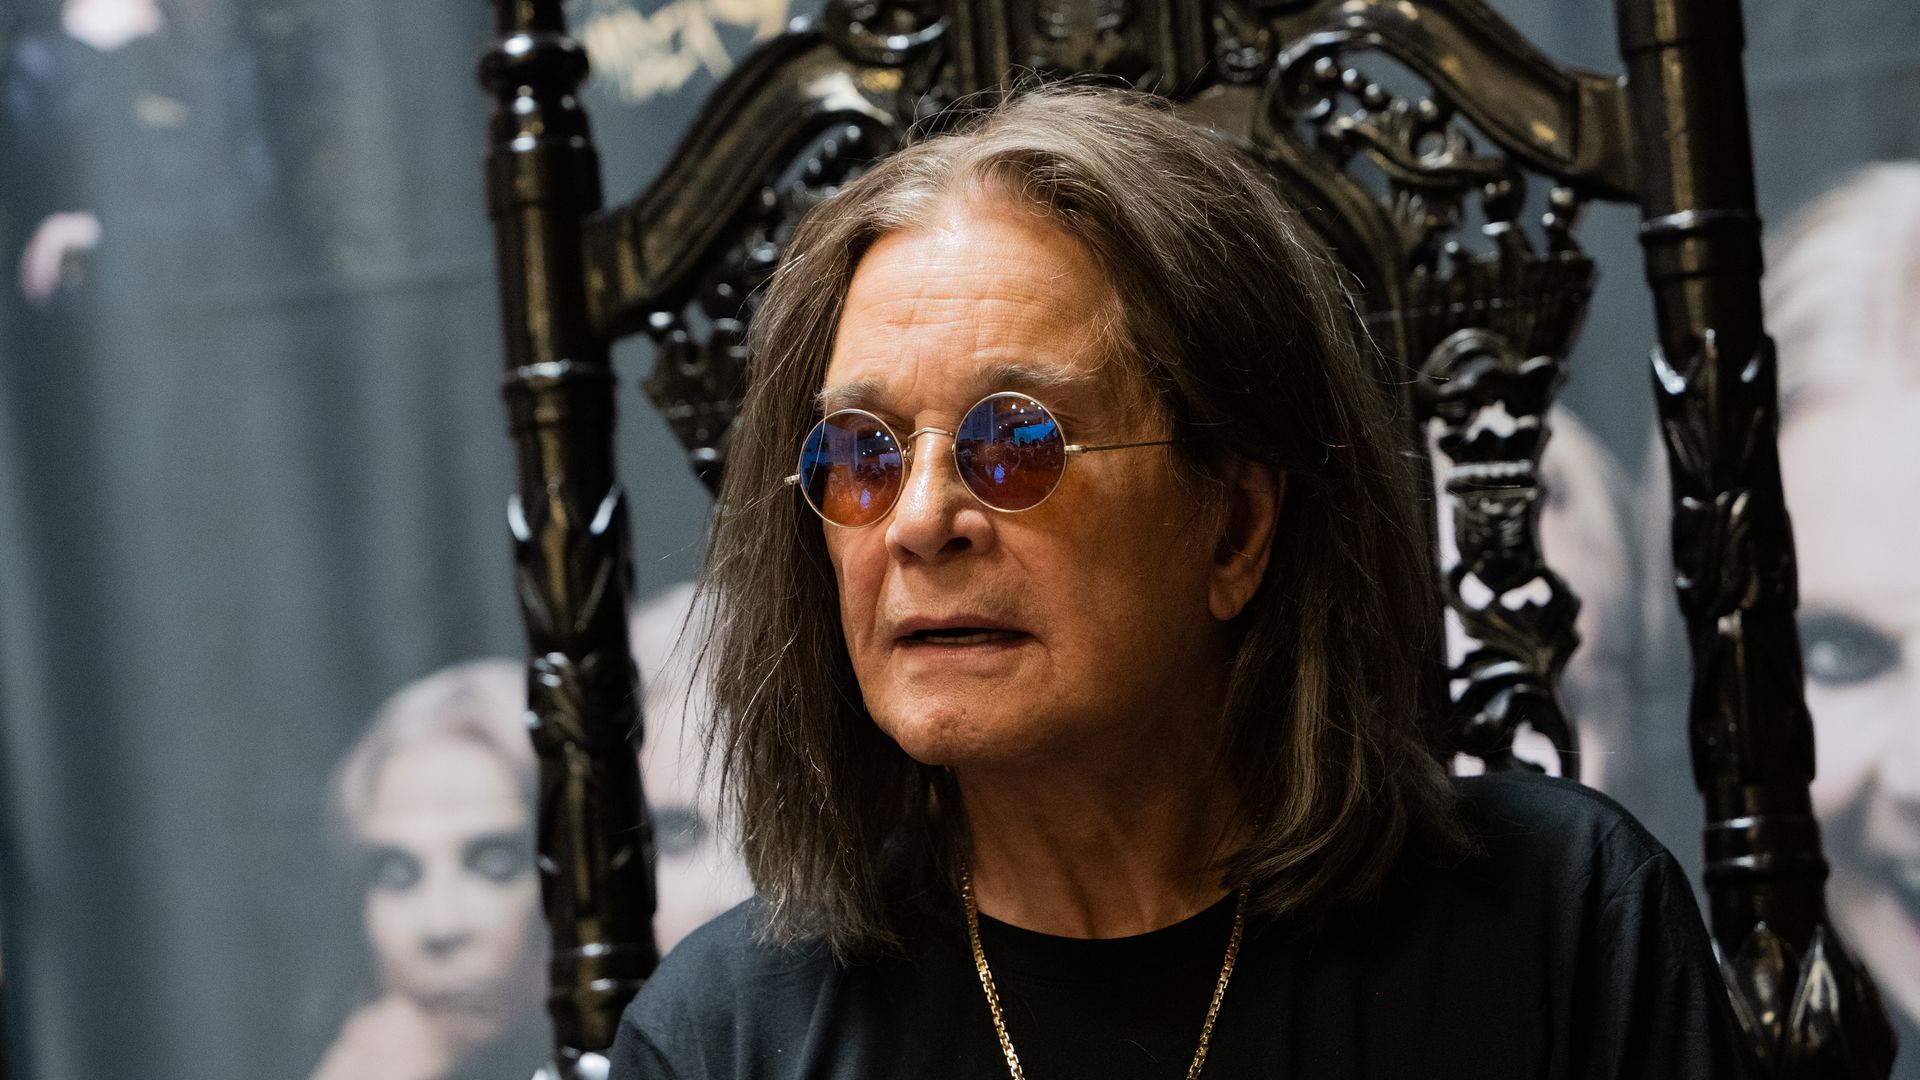 Ozzy Osbourne celebrates 75th birthday surrounded by his kids and grandchildren in bittersweet moment